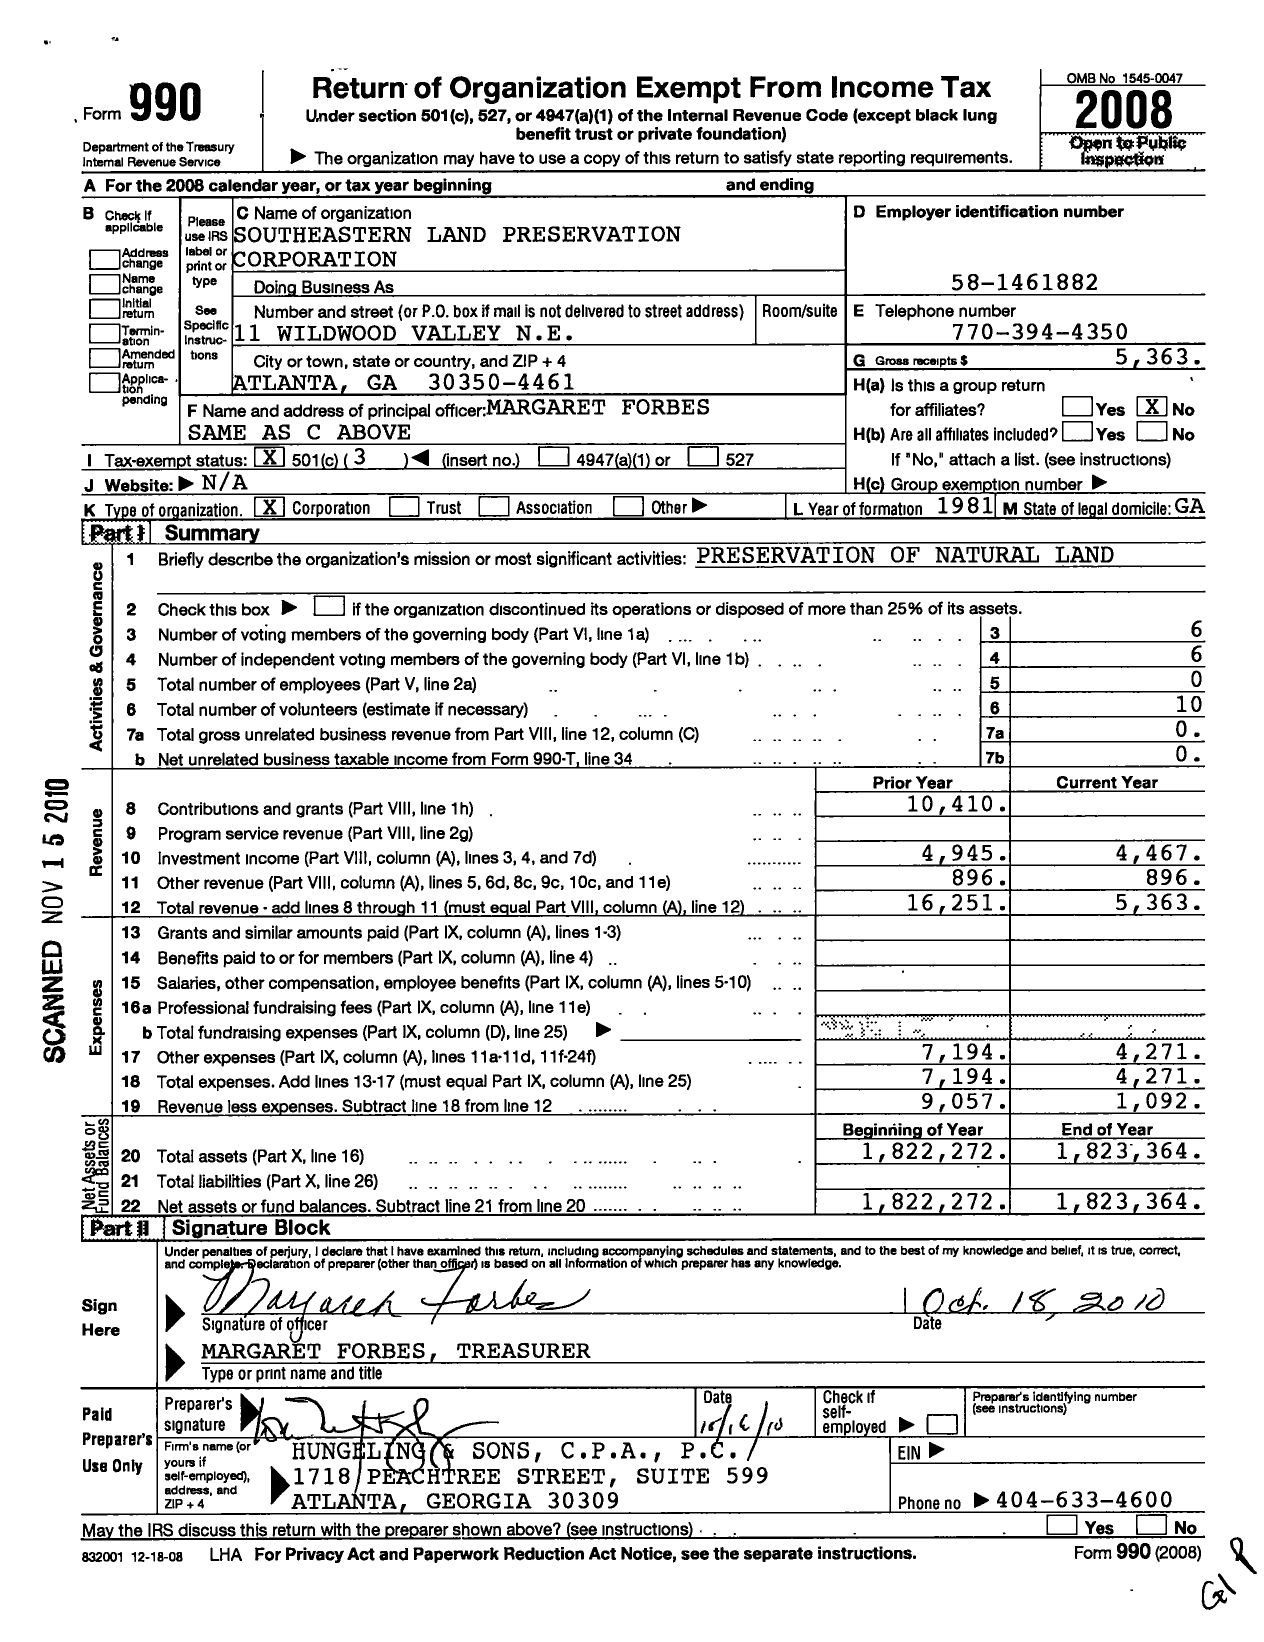 Image of first page of 2008 Form 990 for Southeastern Land Preservation Corporation